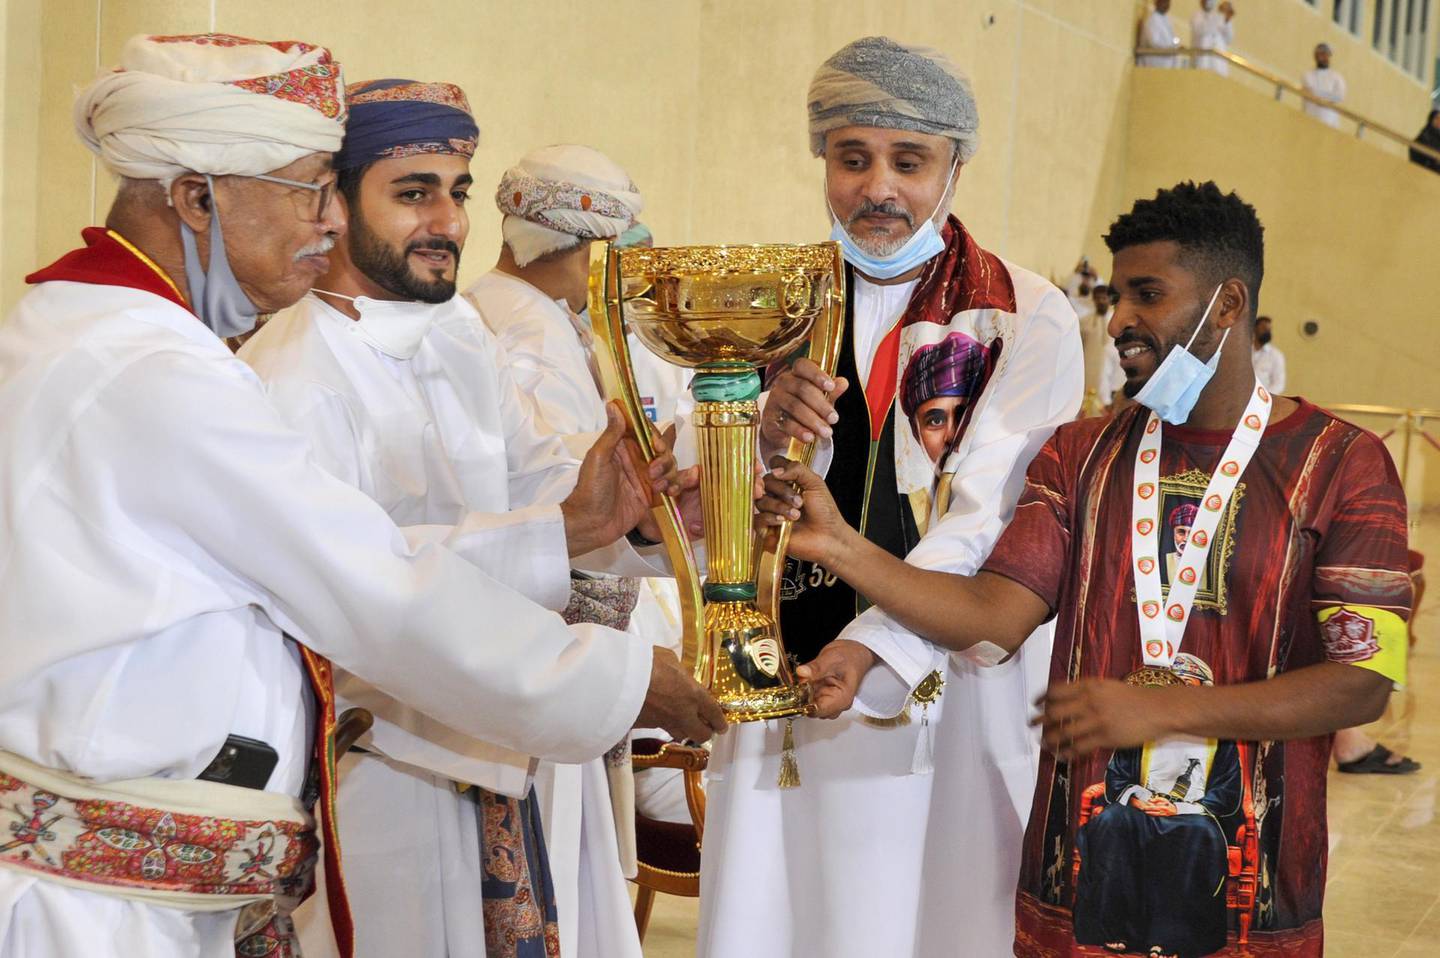 Omani Minister of Sport Sayyid Dhi Yazan bin Haitham (2nd-L) presents the trophy to Dhofar players after winning the Sultan Qaboos Cup final between Dhofar and Al-Orouba at the Rustaq Sports Complex west of the Omani capital Muscat on November 29, 2020. / AFP / Haitham AL-SHUKAIRI
